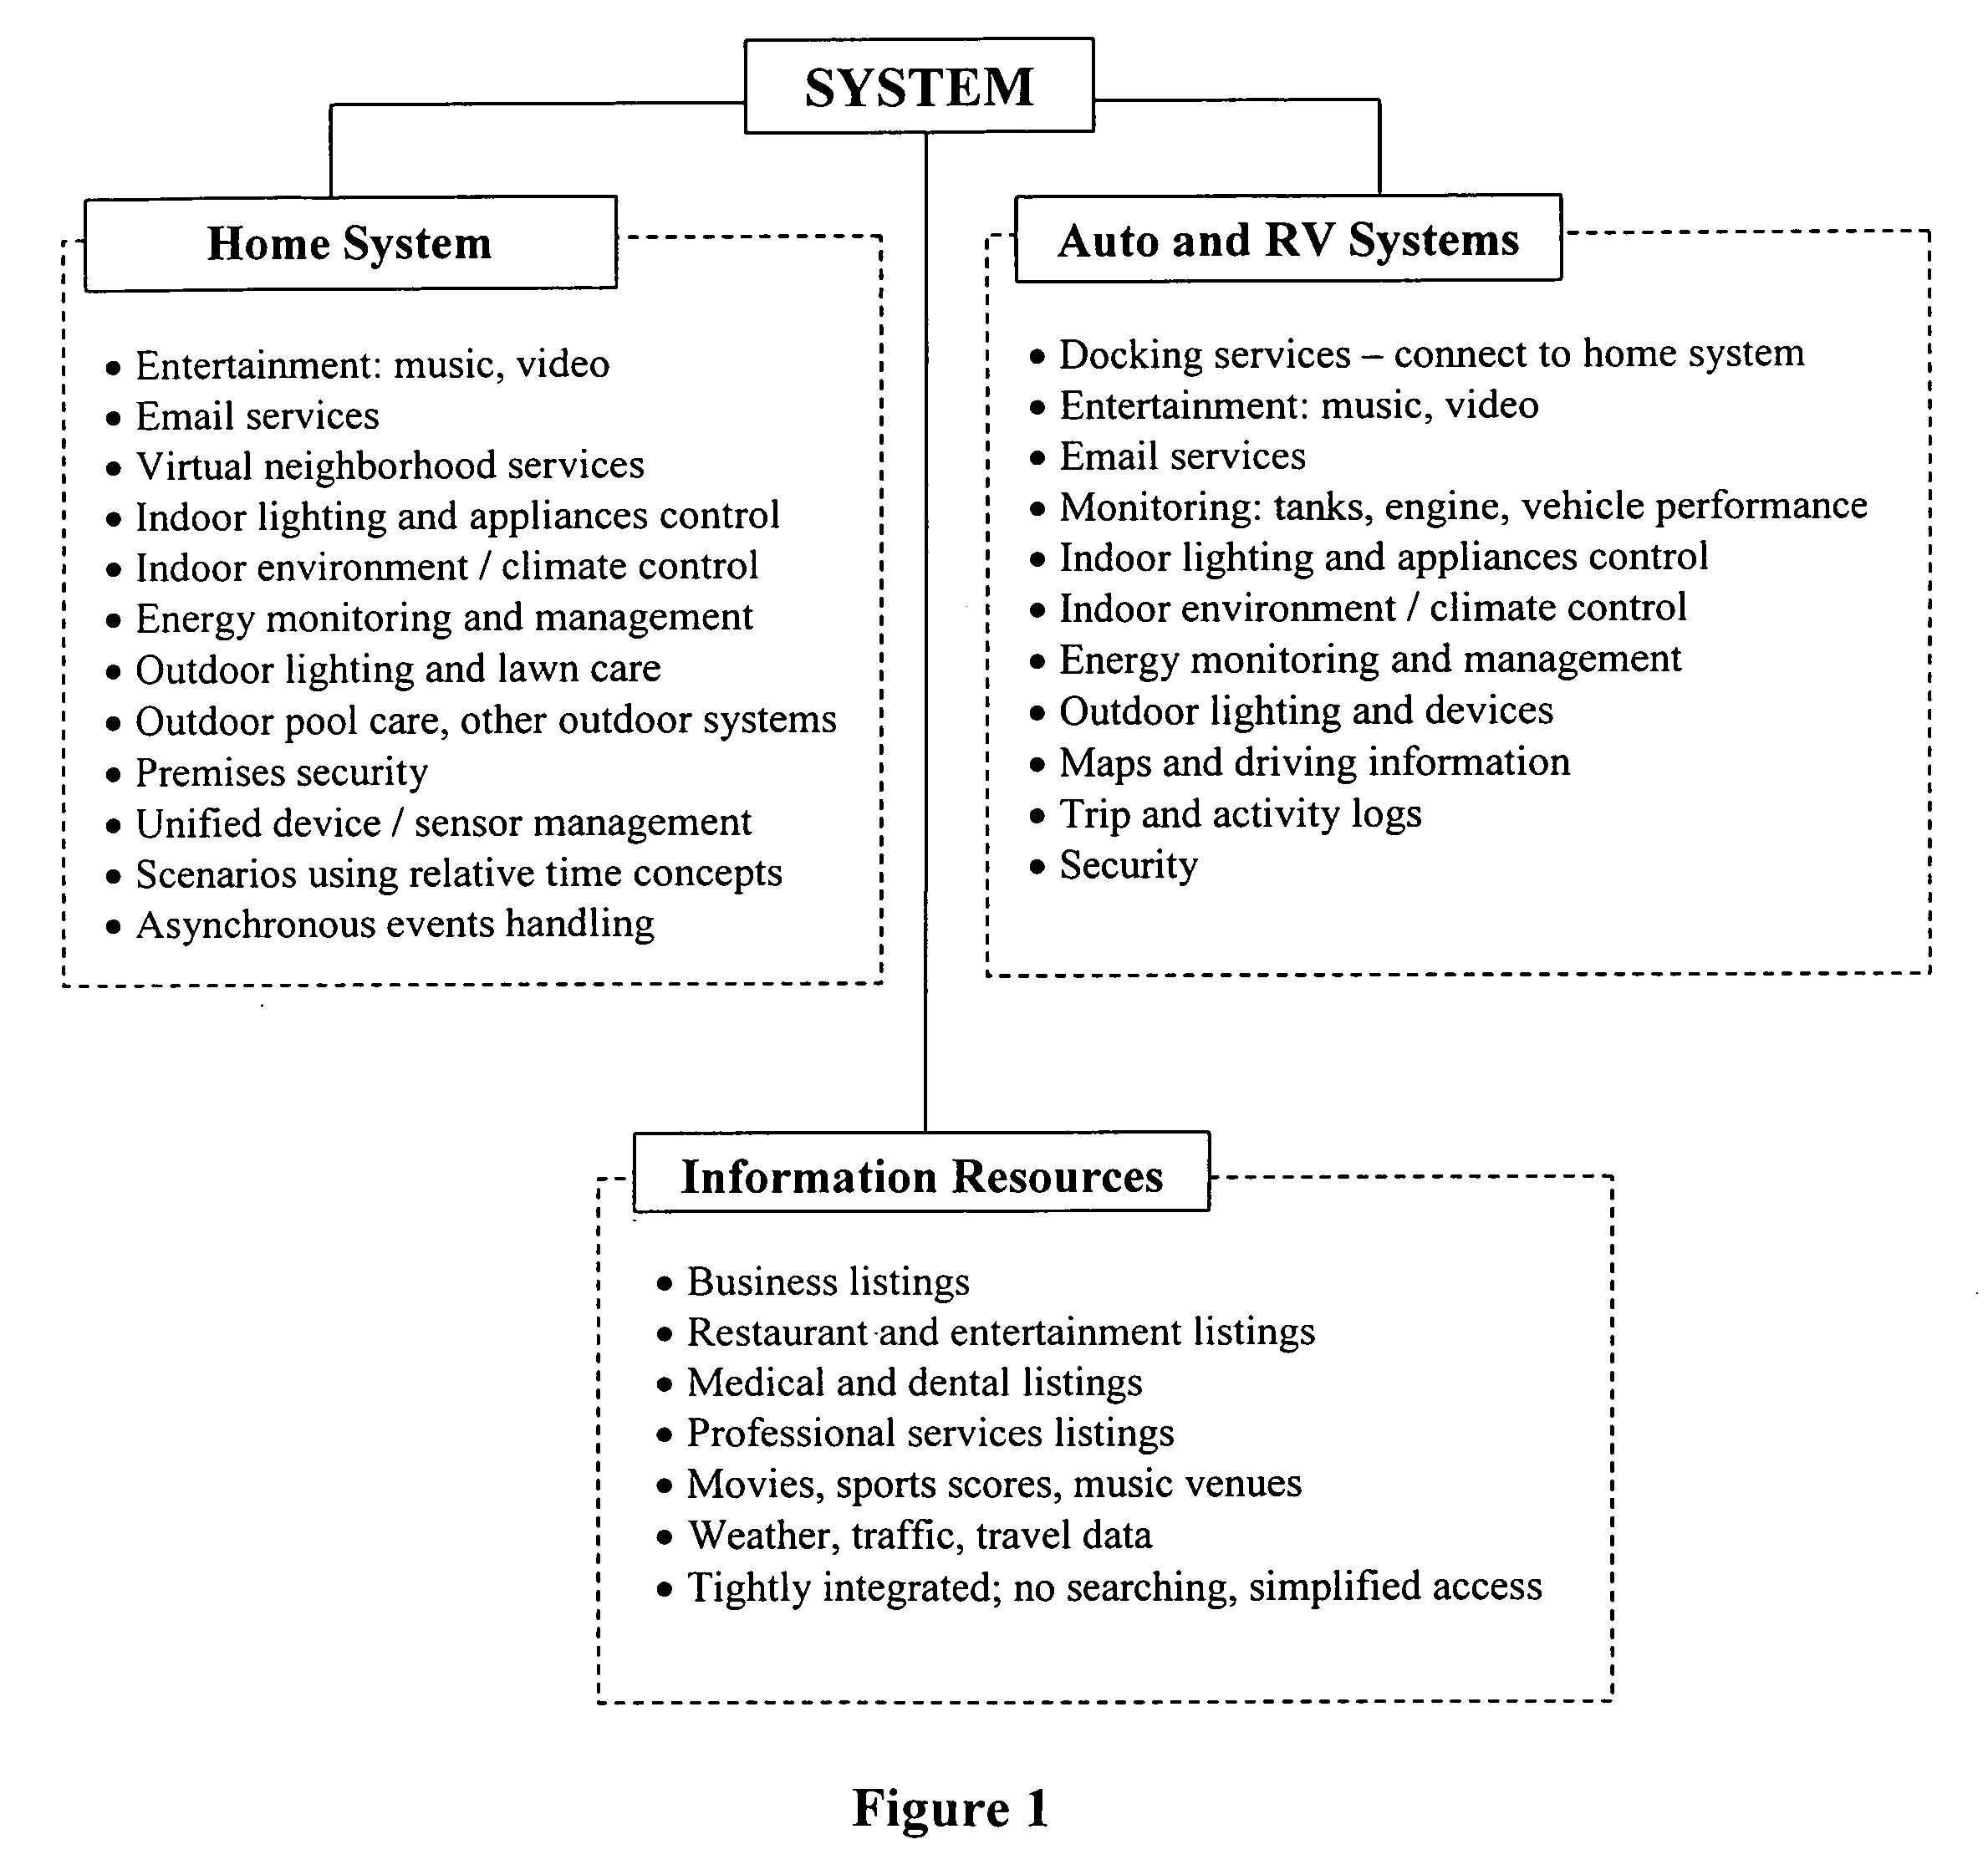 Methods and systems for automating the control of objects within a defined human environment